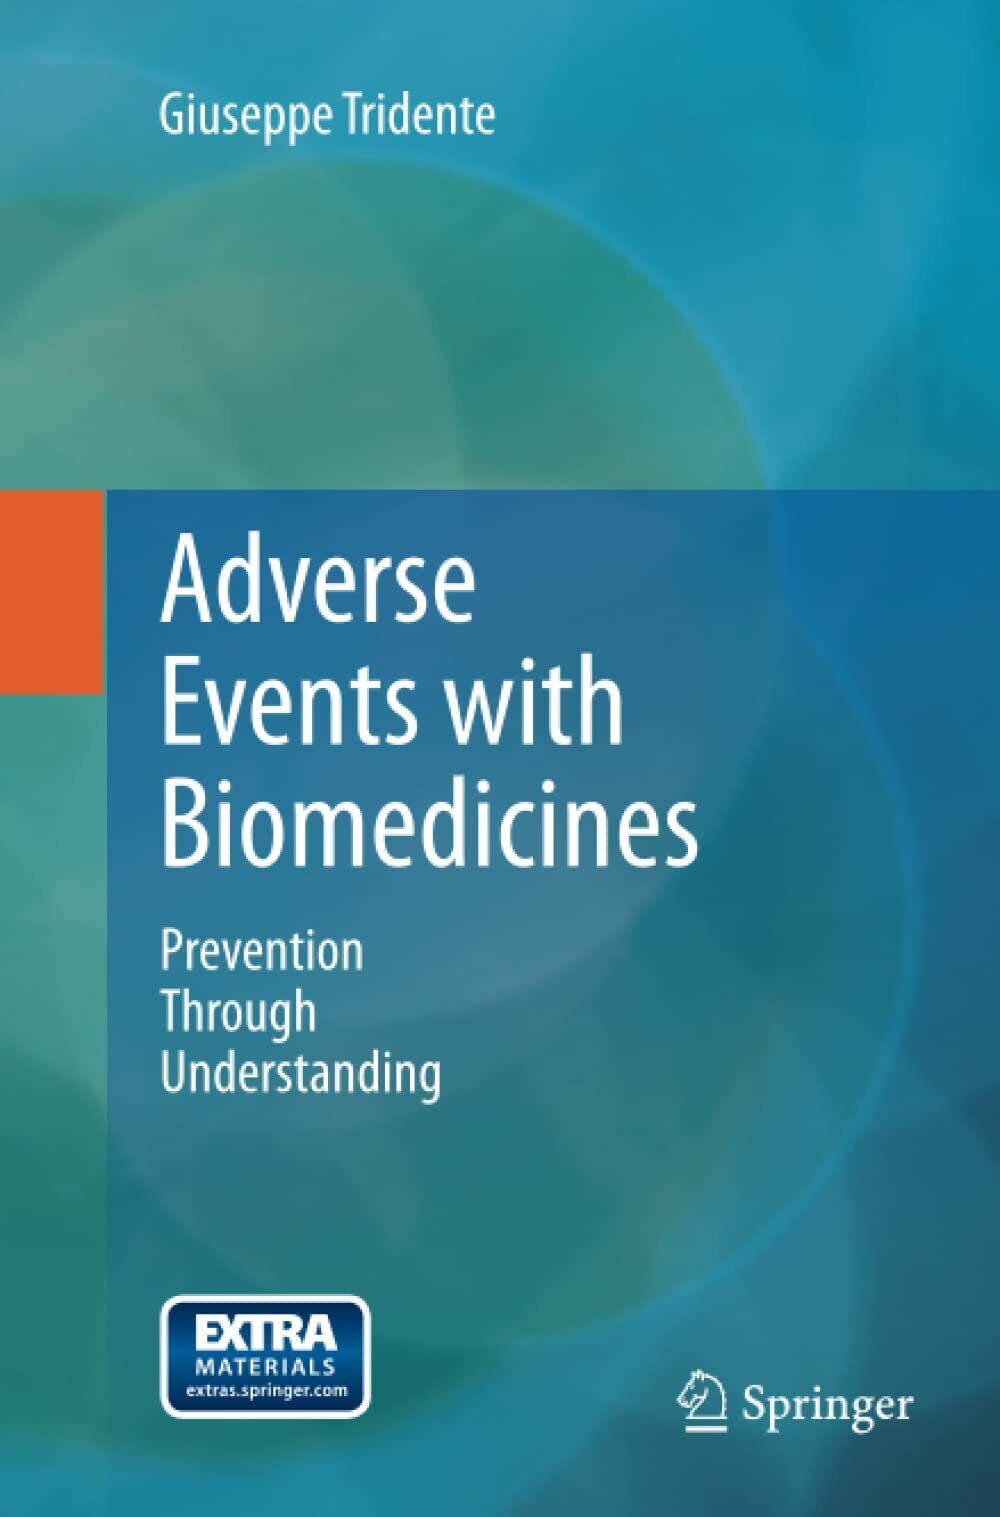 Adverse Events with Biomedicines - Giuseppe Tridente - Springer, 2017